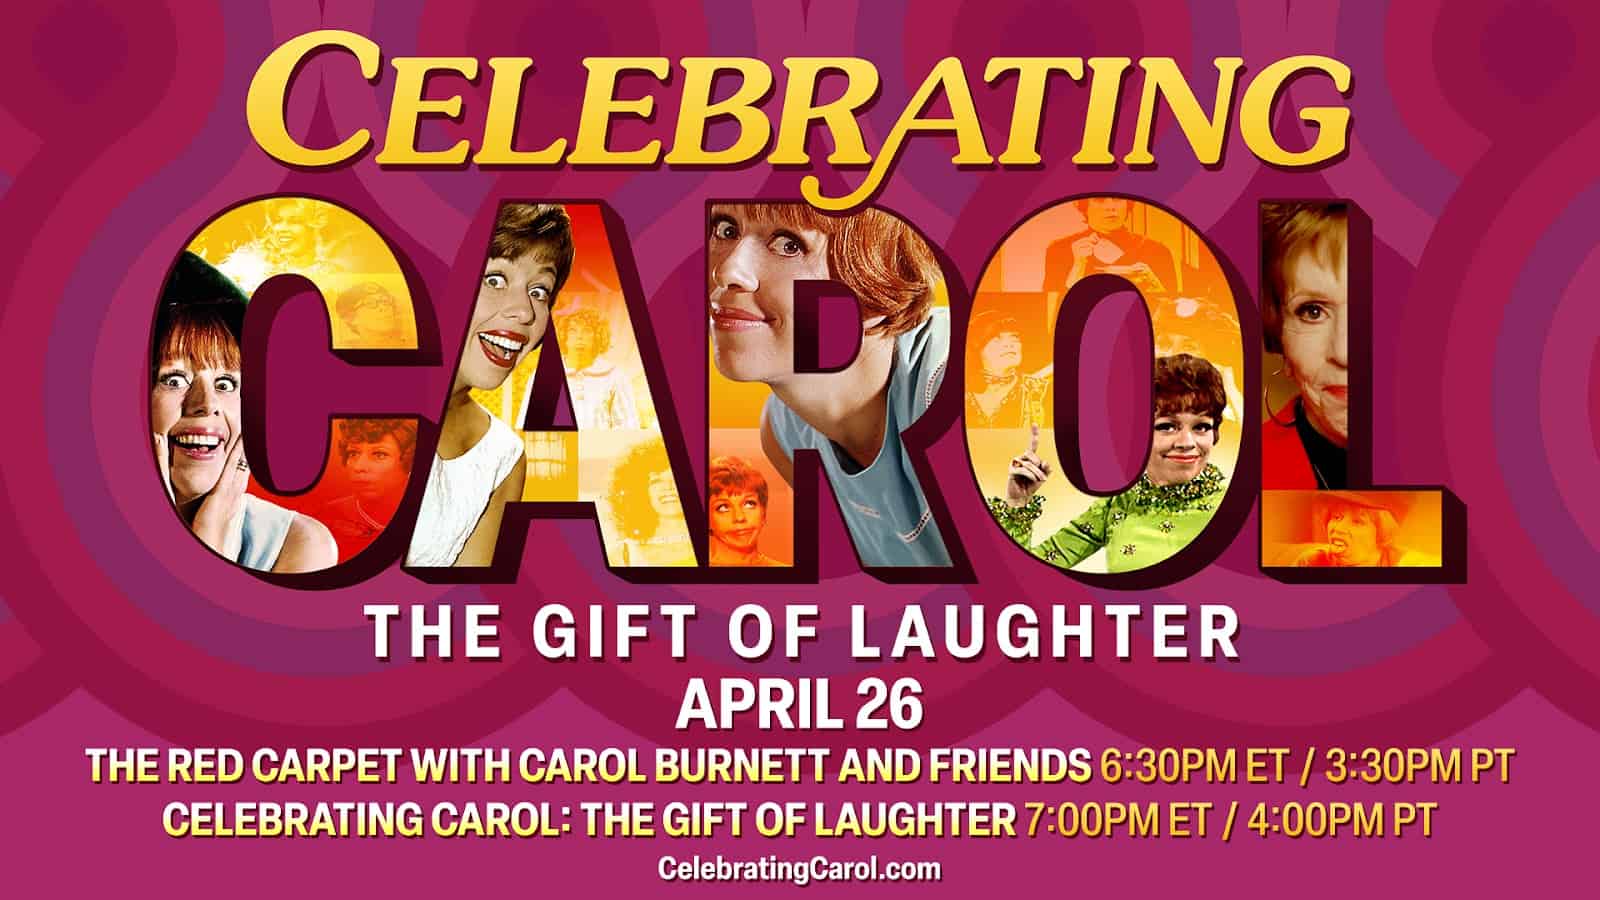 Celebrating Carol Burnett's Comedy Legacy: An Exclusive Streaming Event 27